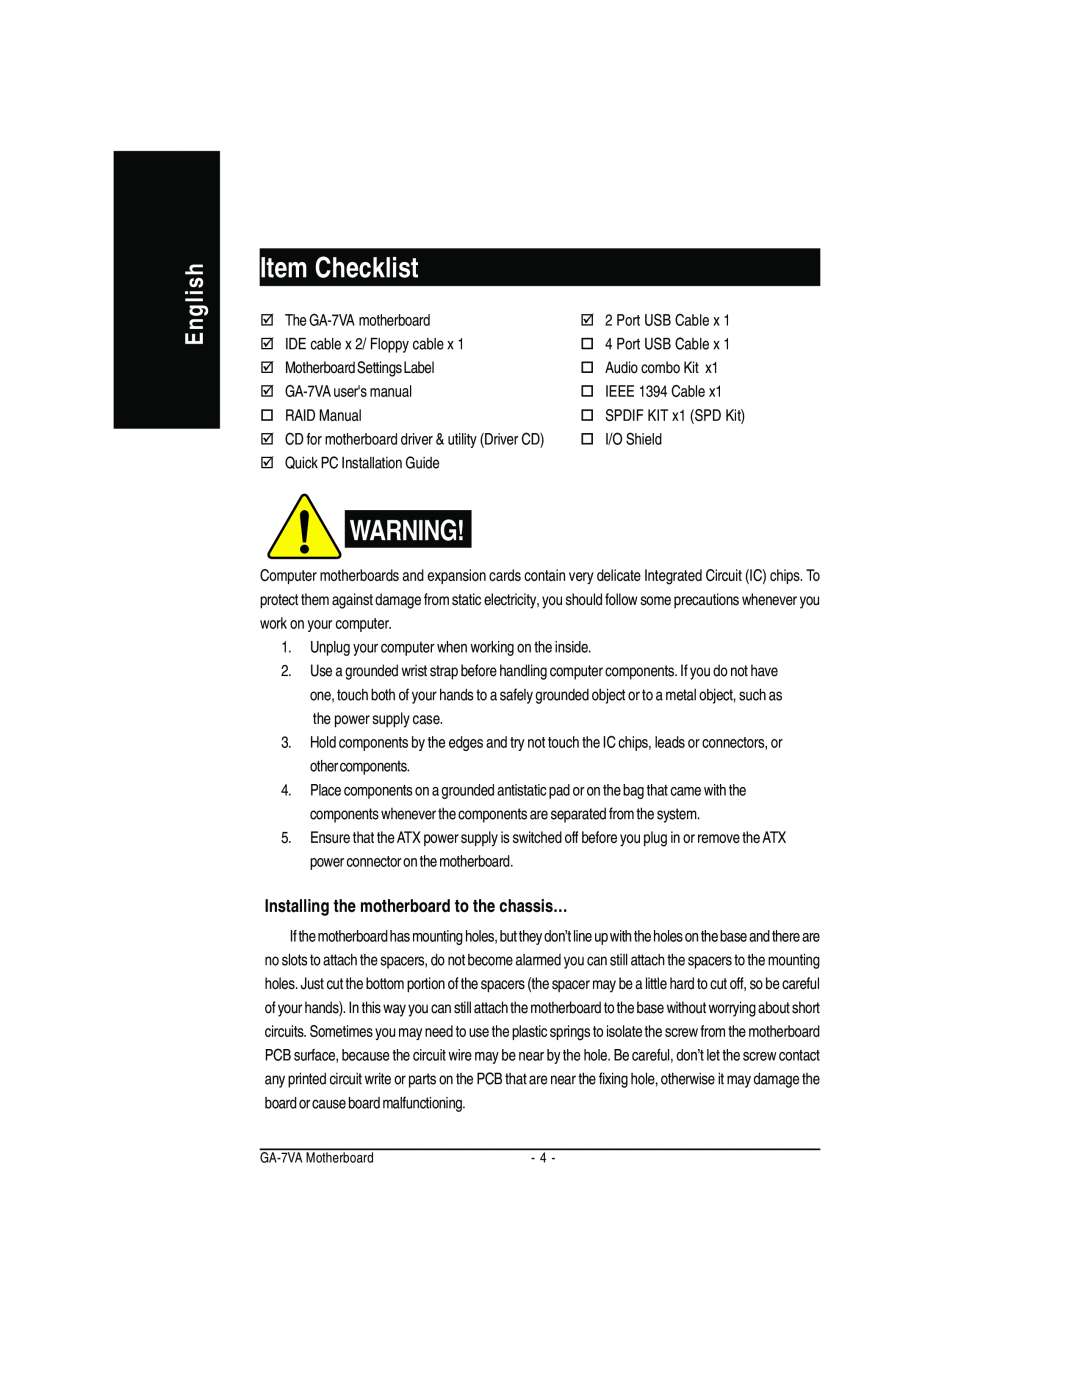 Gigabyte GA-7VA manual Item Checklist, English, Installing the motherboard to the chassis… 